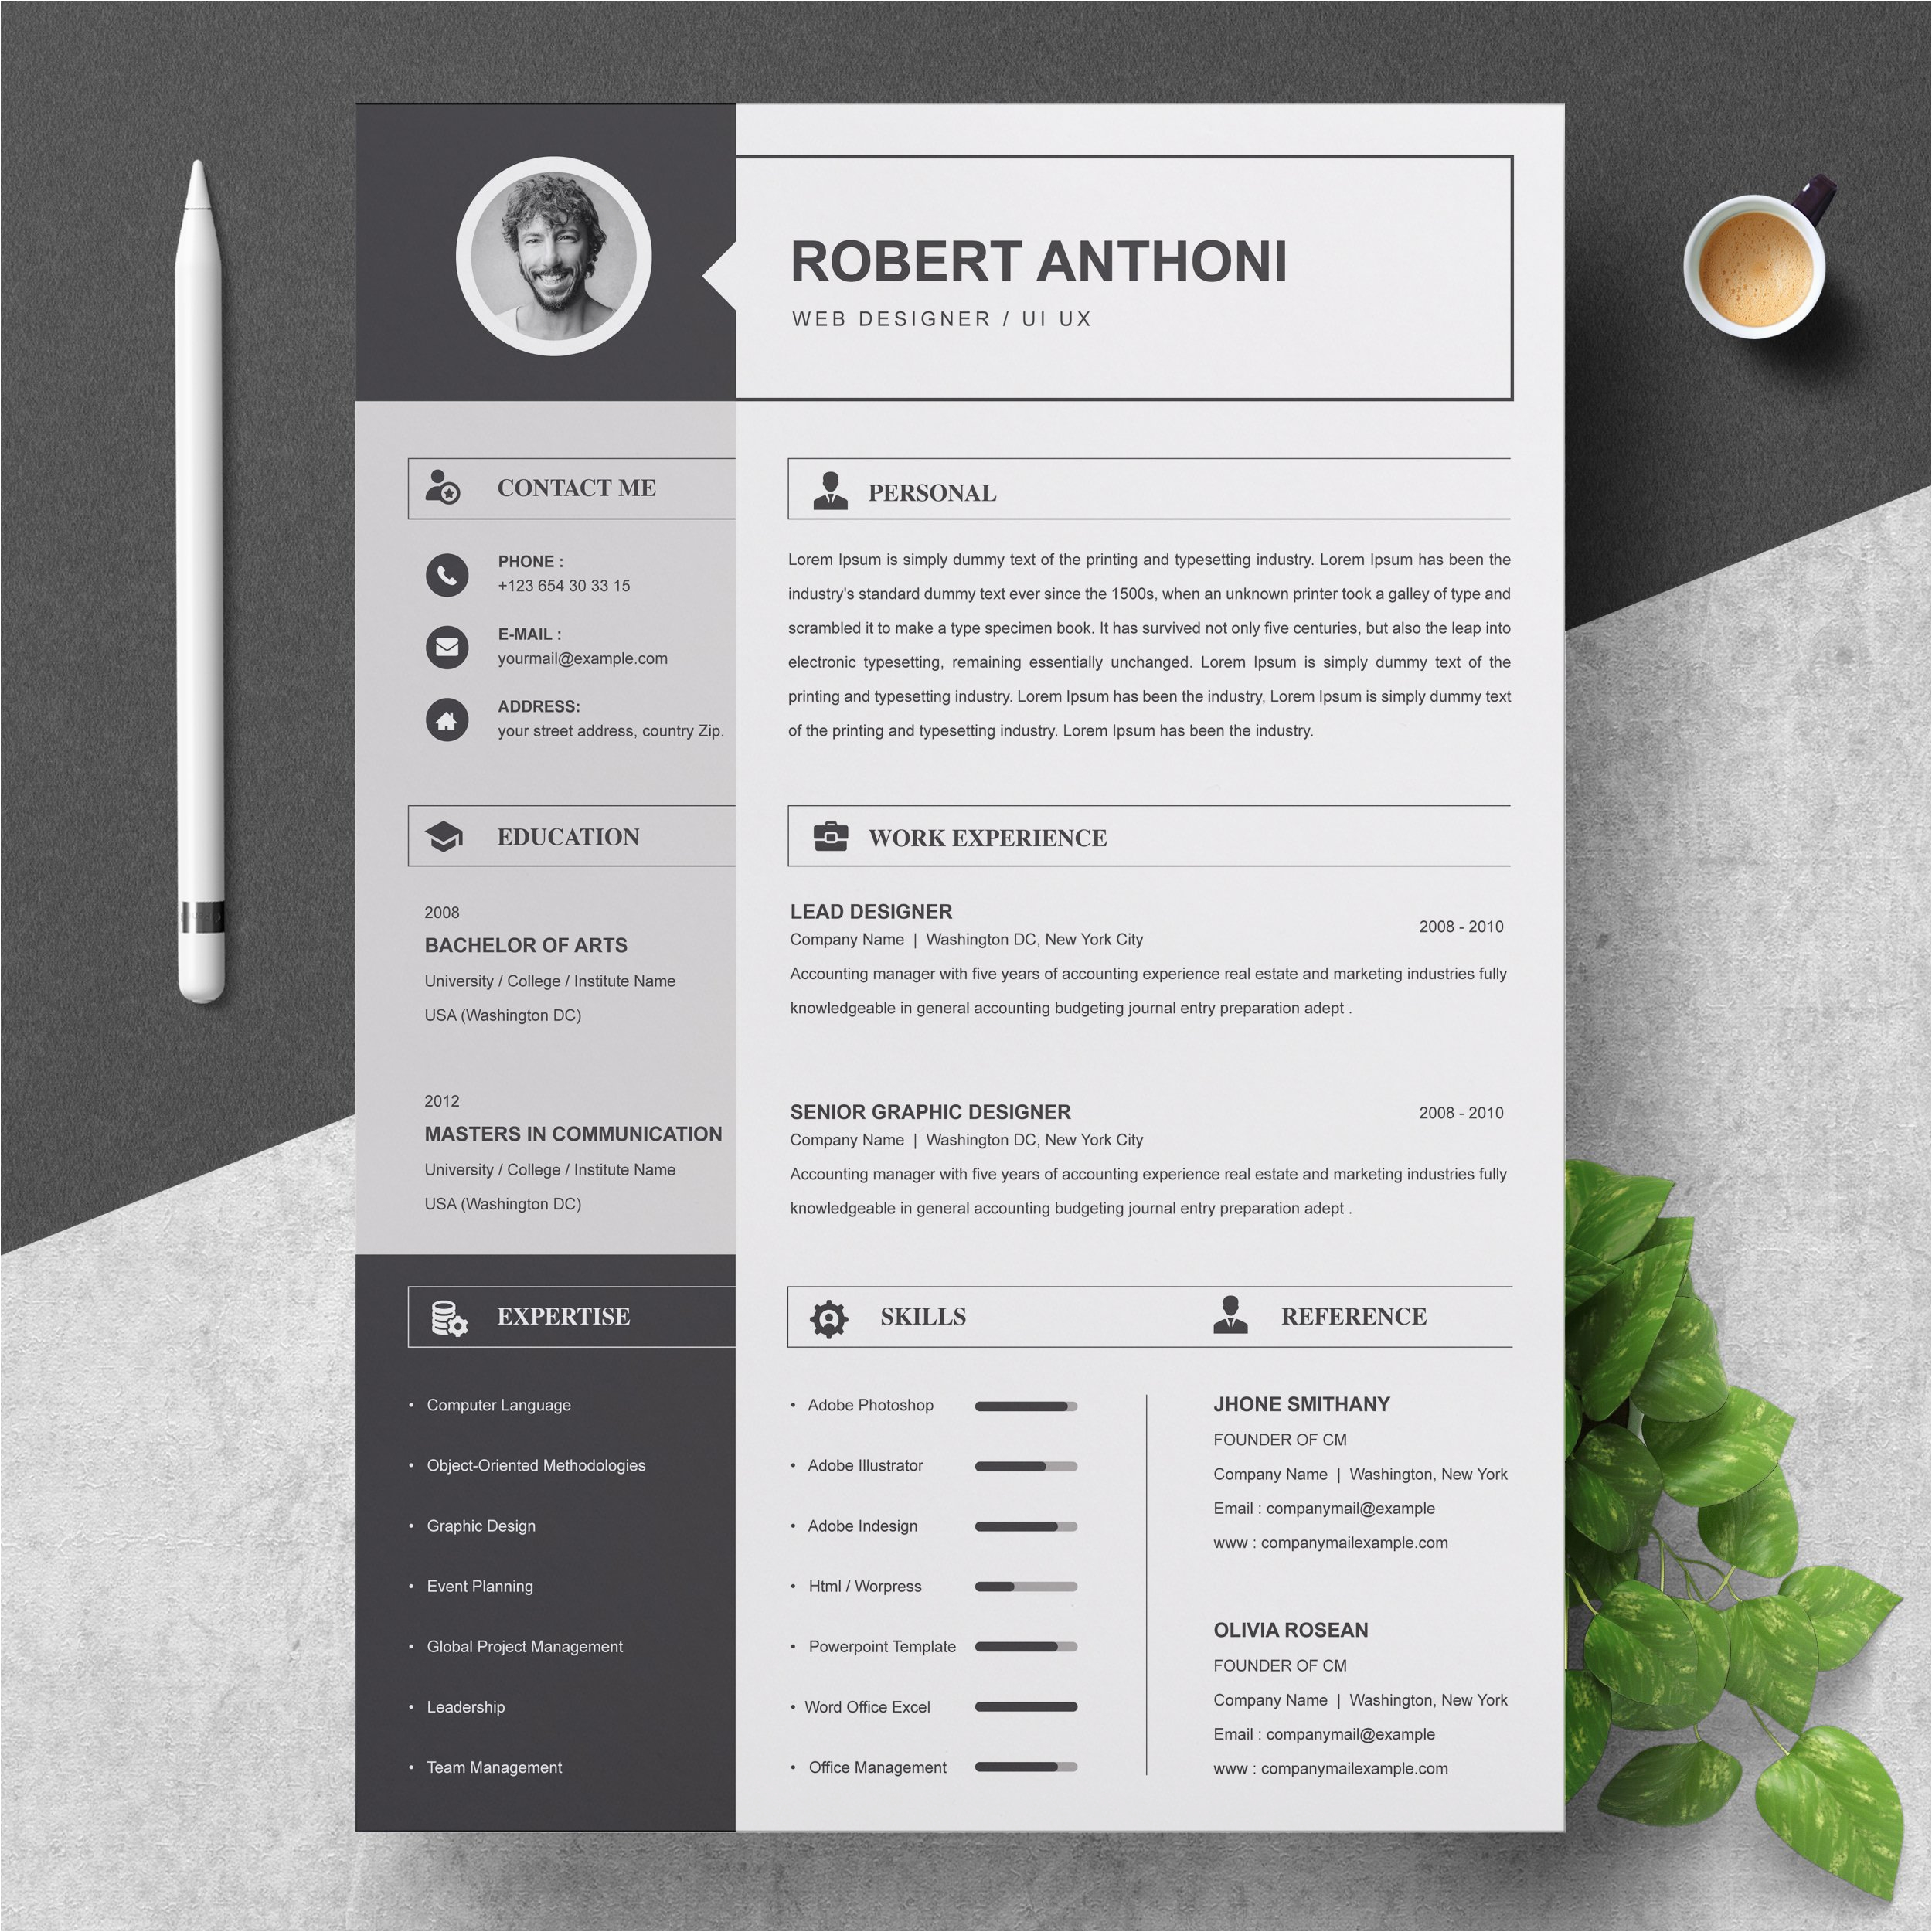 Resume and Cv Templates for Pages 2 Pages Resume Template Cv Design